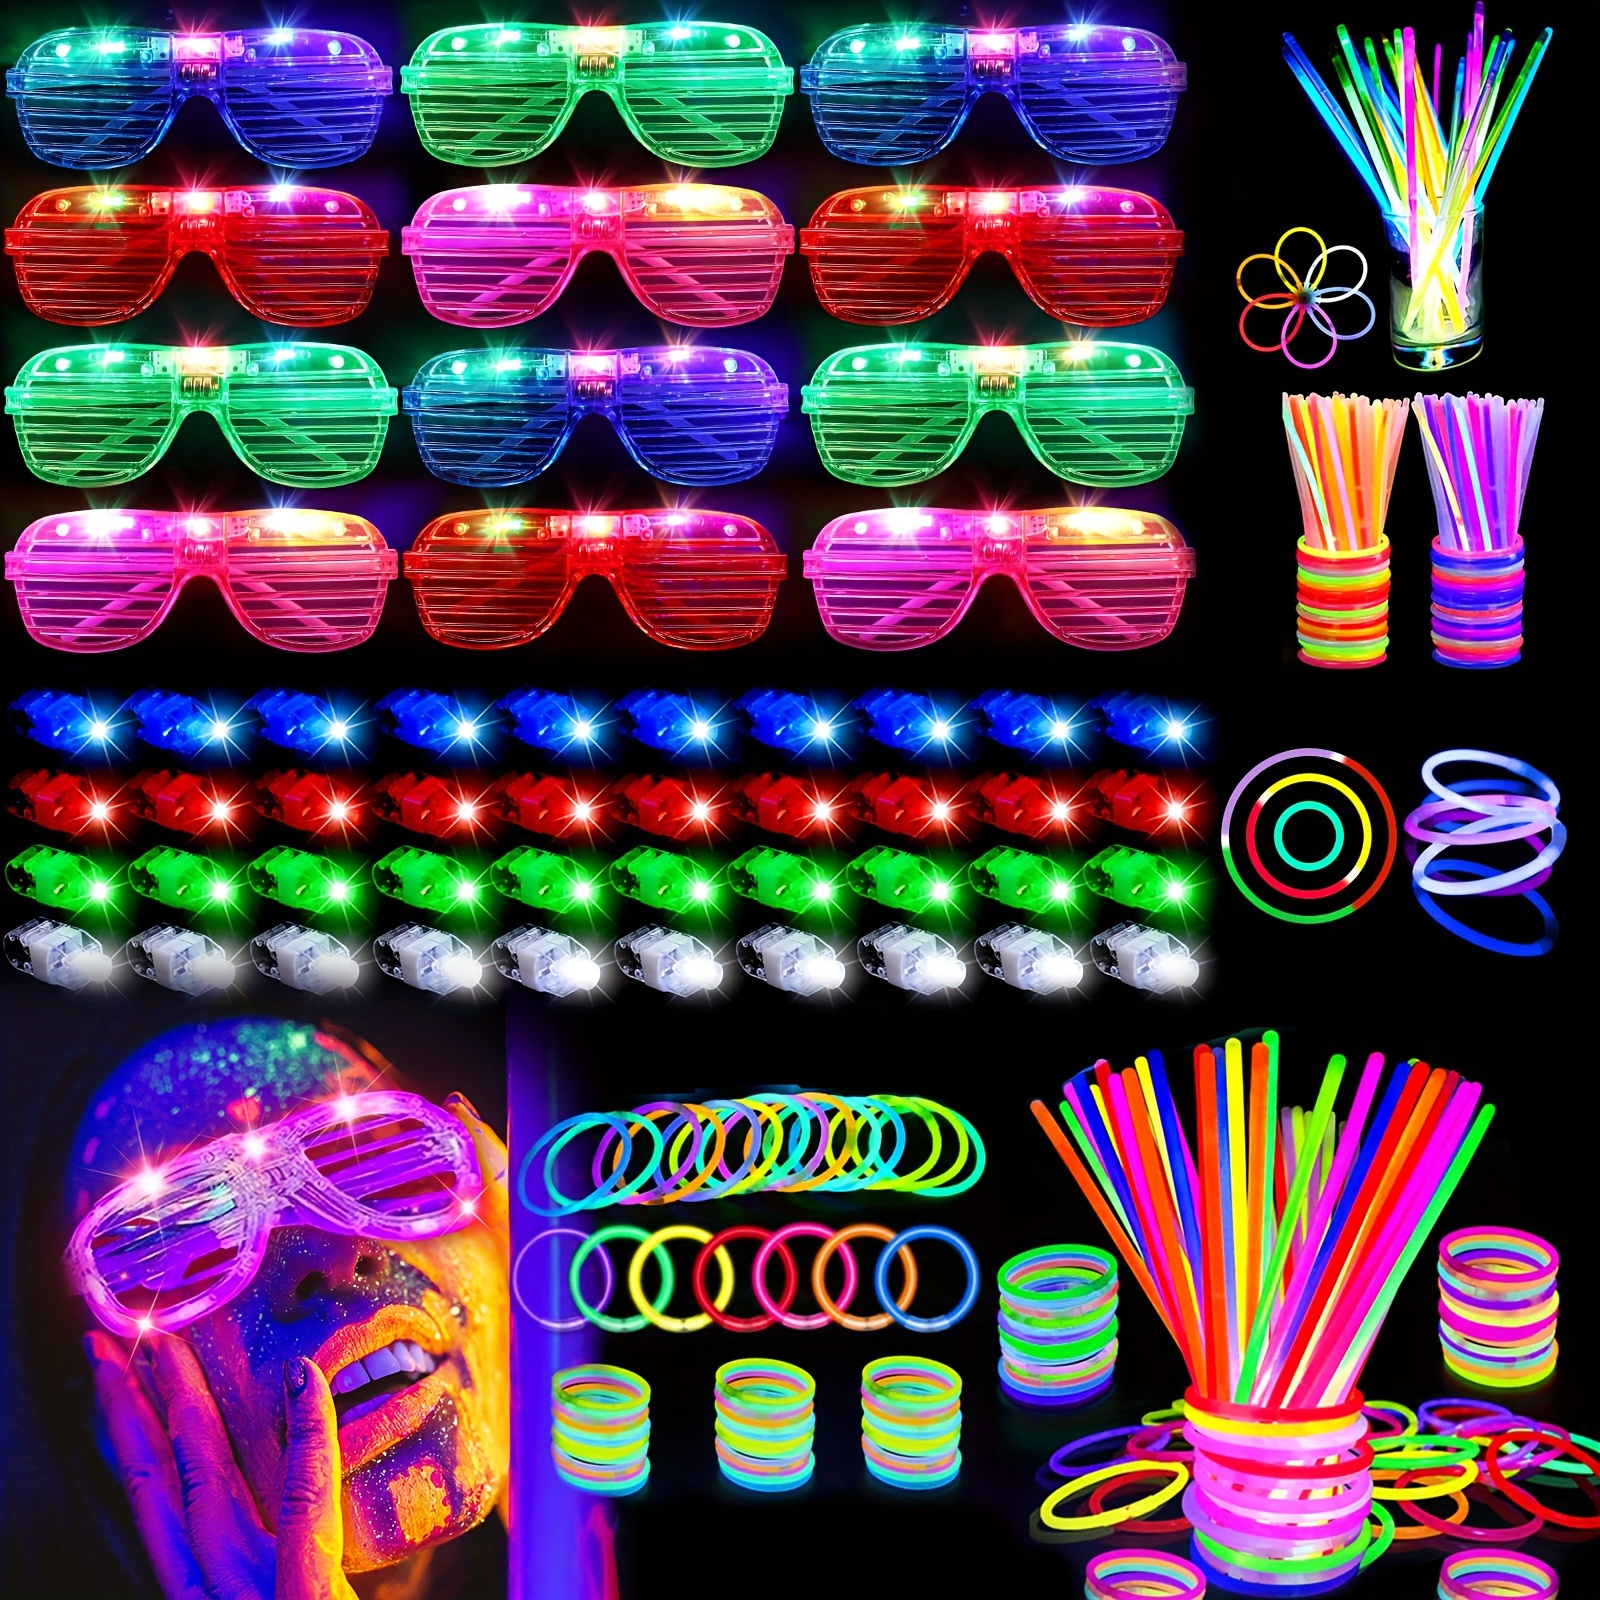 

170-piece Ultimate Glow In The Dark Party Kit - Illuminate Your Fun With Led Shutter Glasses, Neon Headbands & Bracelets - Unleash Radiant Celebrations For Glow Parties & Birthdays!